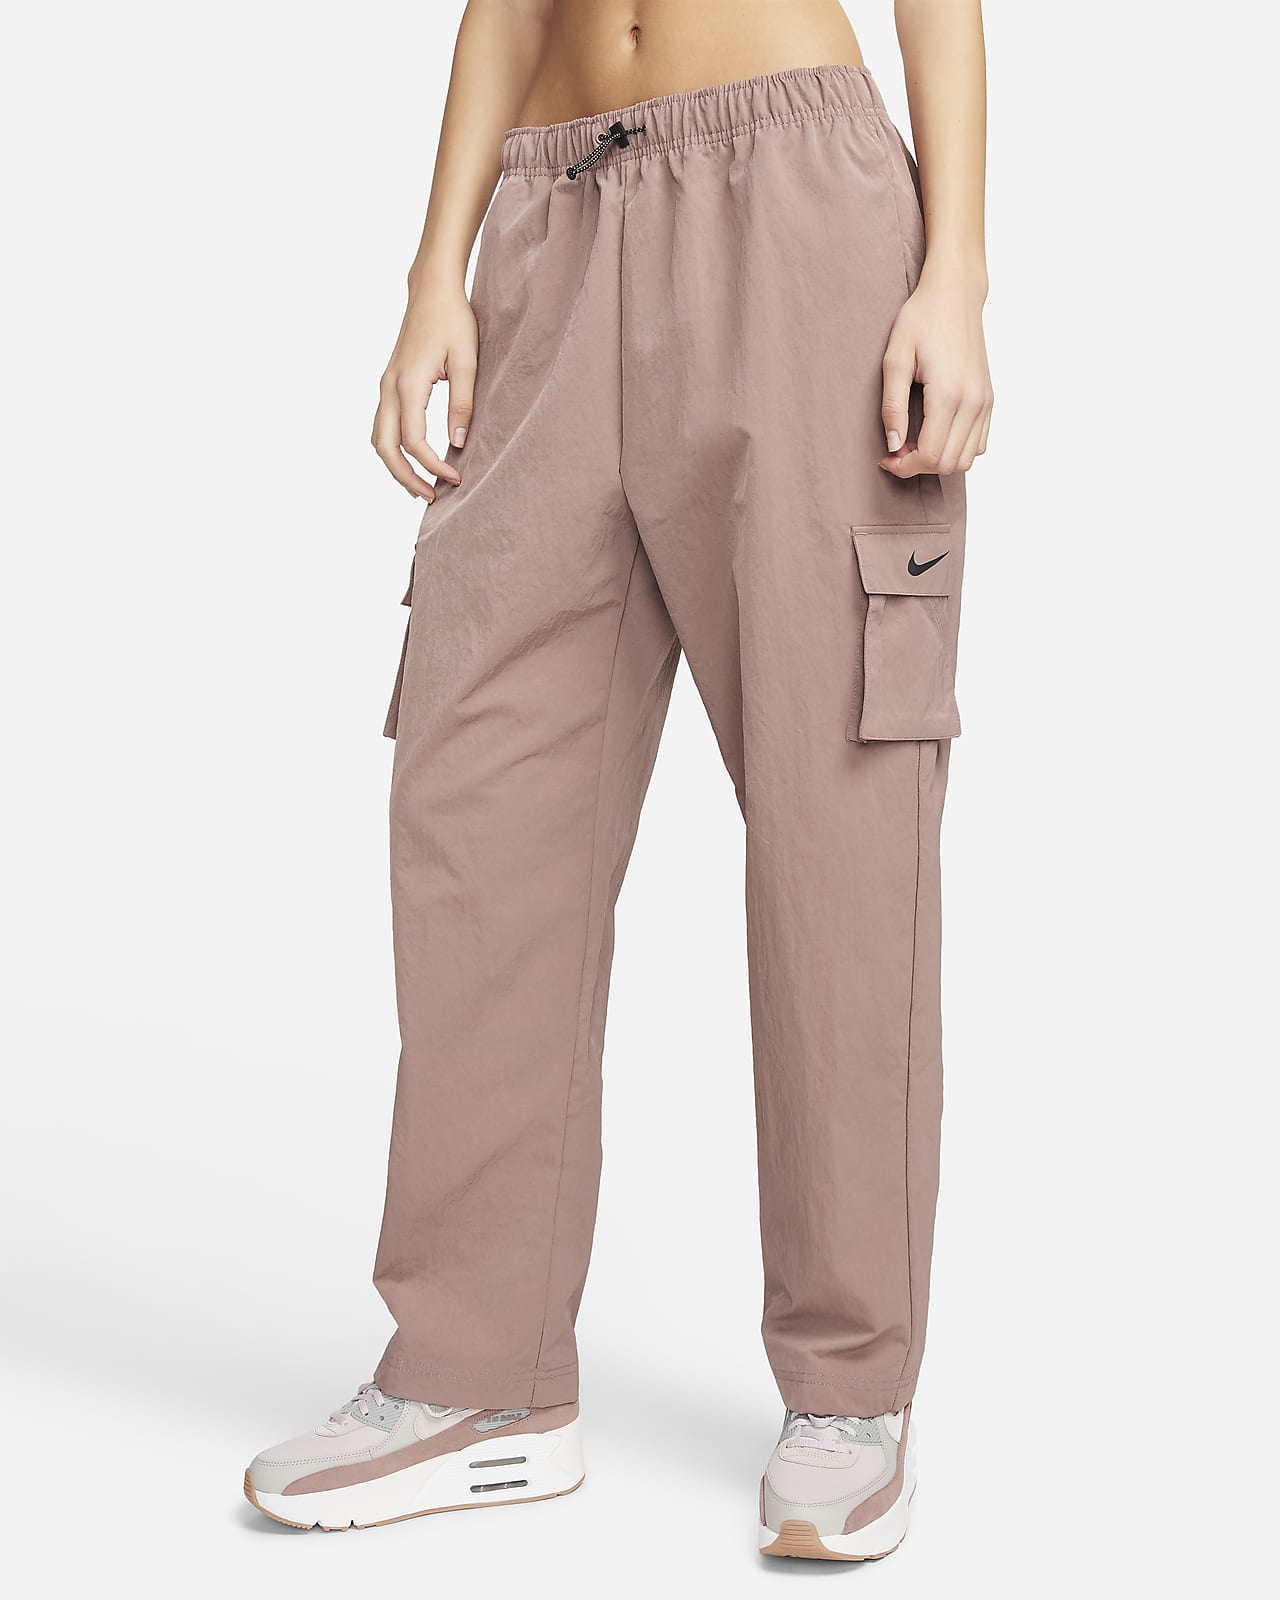 Pink Camo Cargo Trousers, Pink from Missguided on 21 Buttons